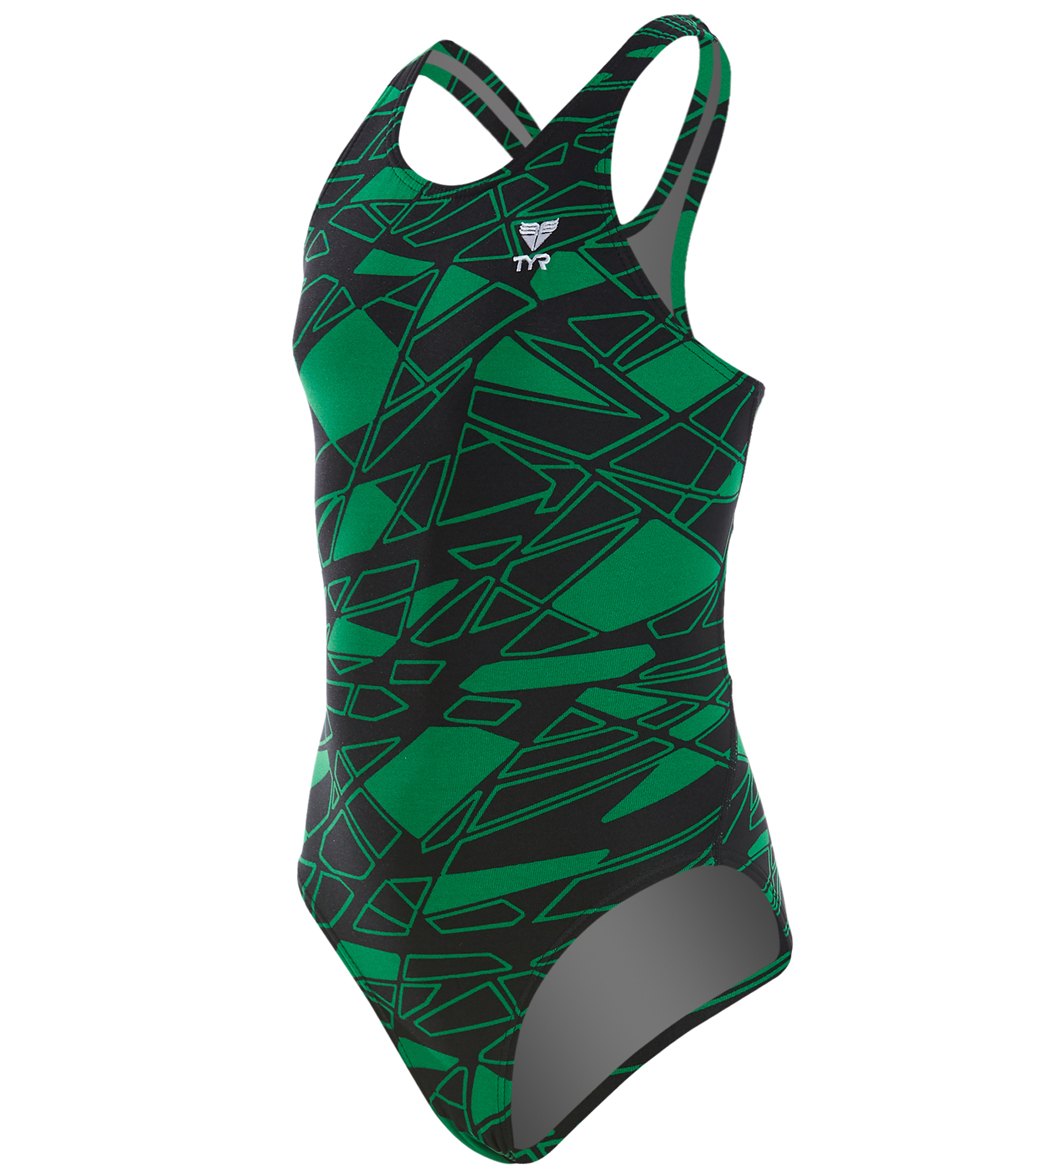 TYR Girls' Mantova Maxfit One Piece Swimsuit - Green 24 Polyester - Swimoutlet.com